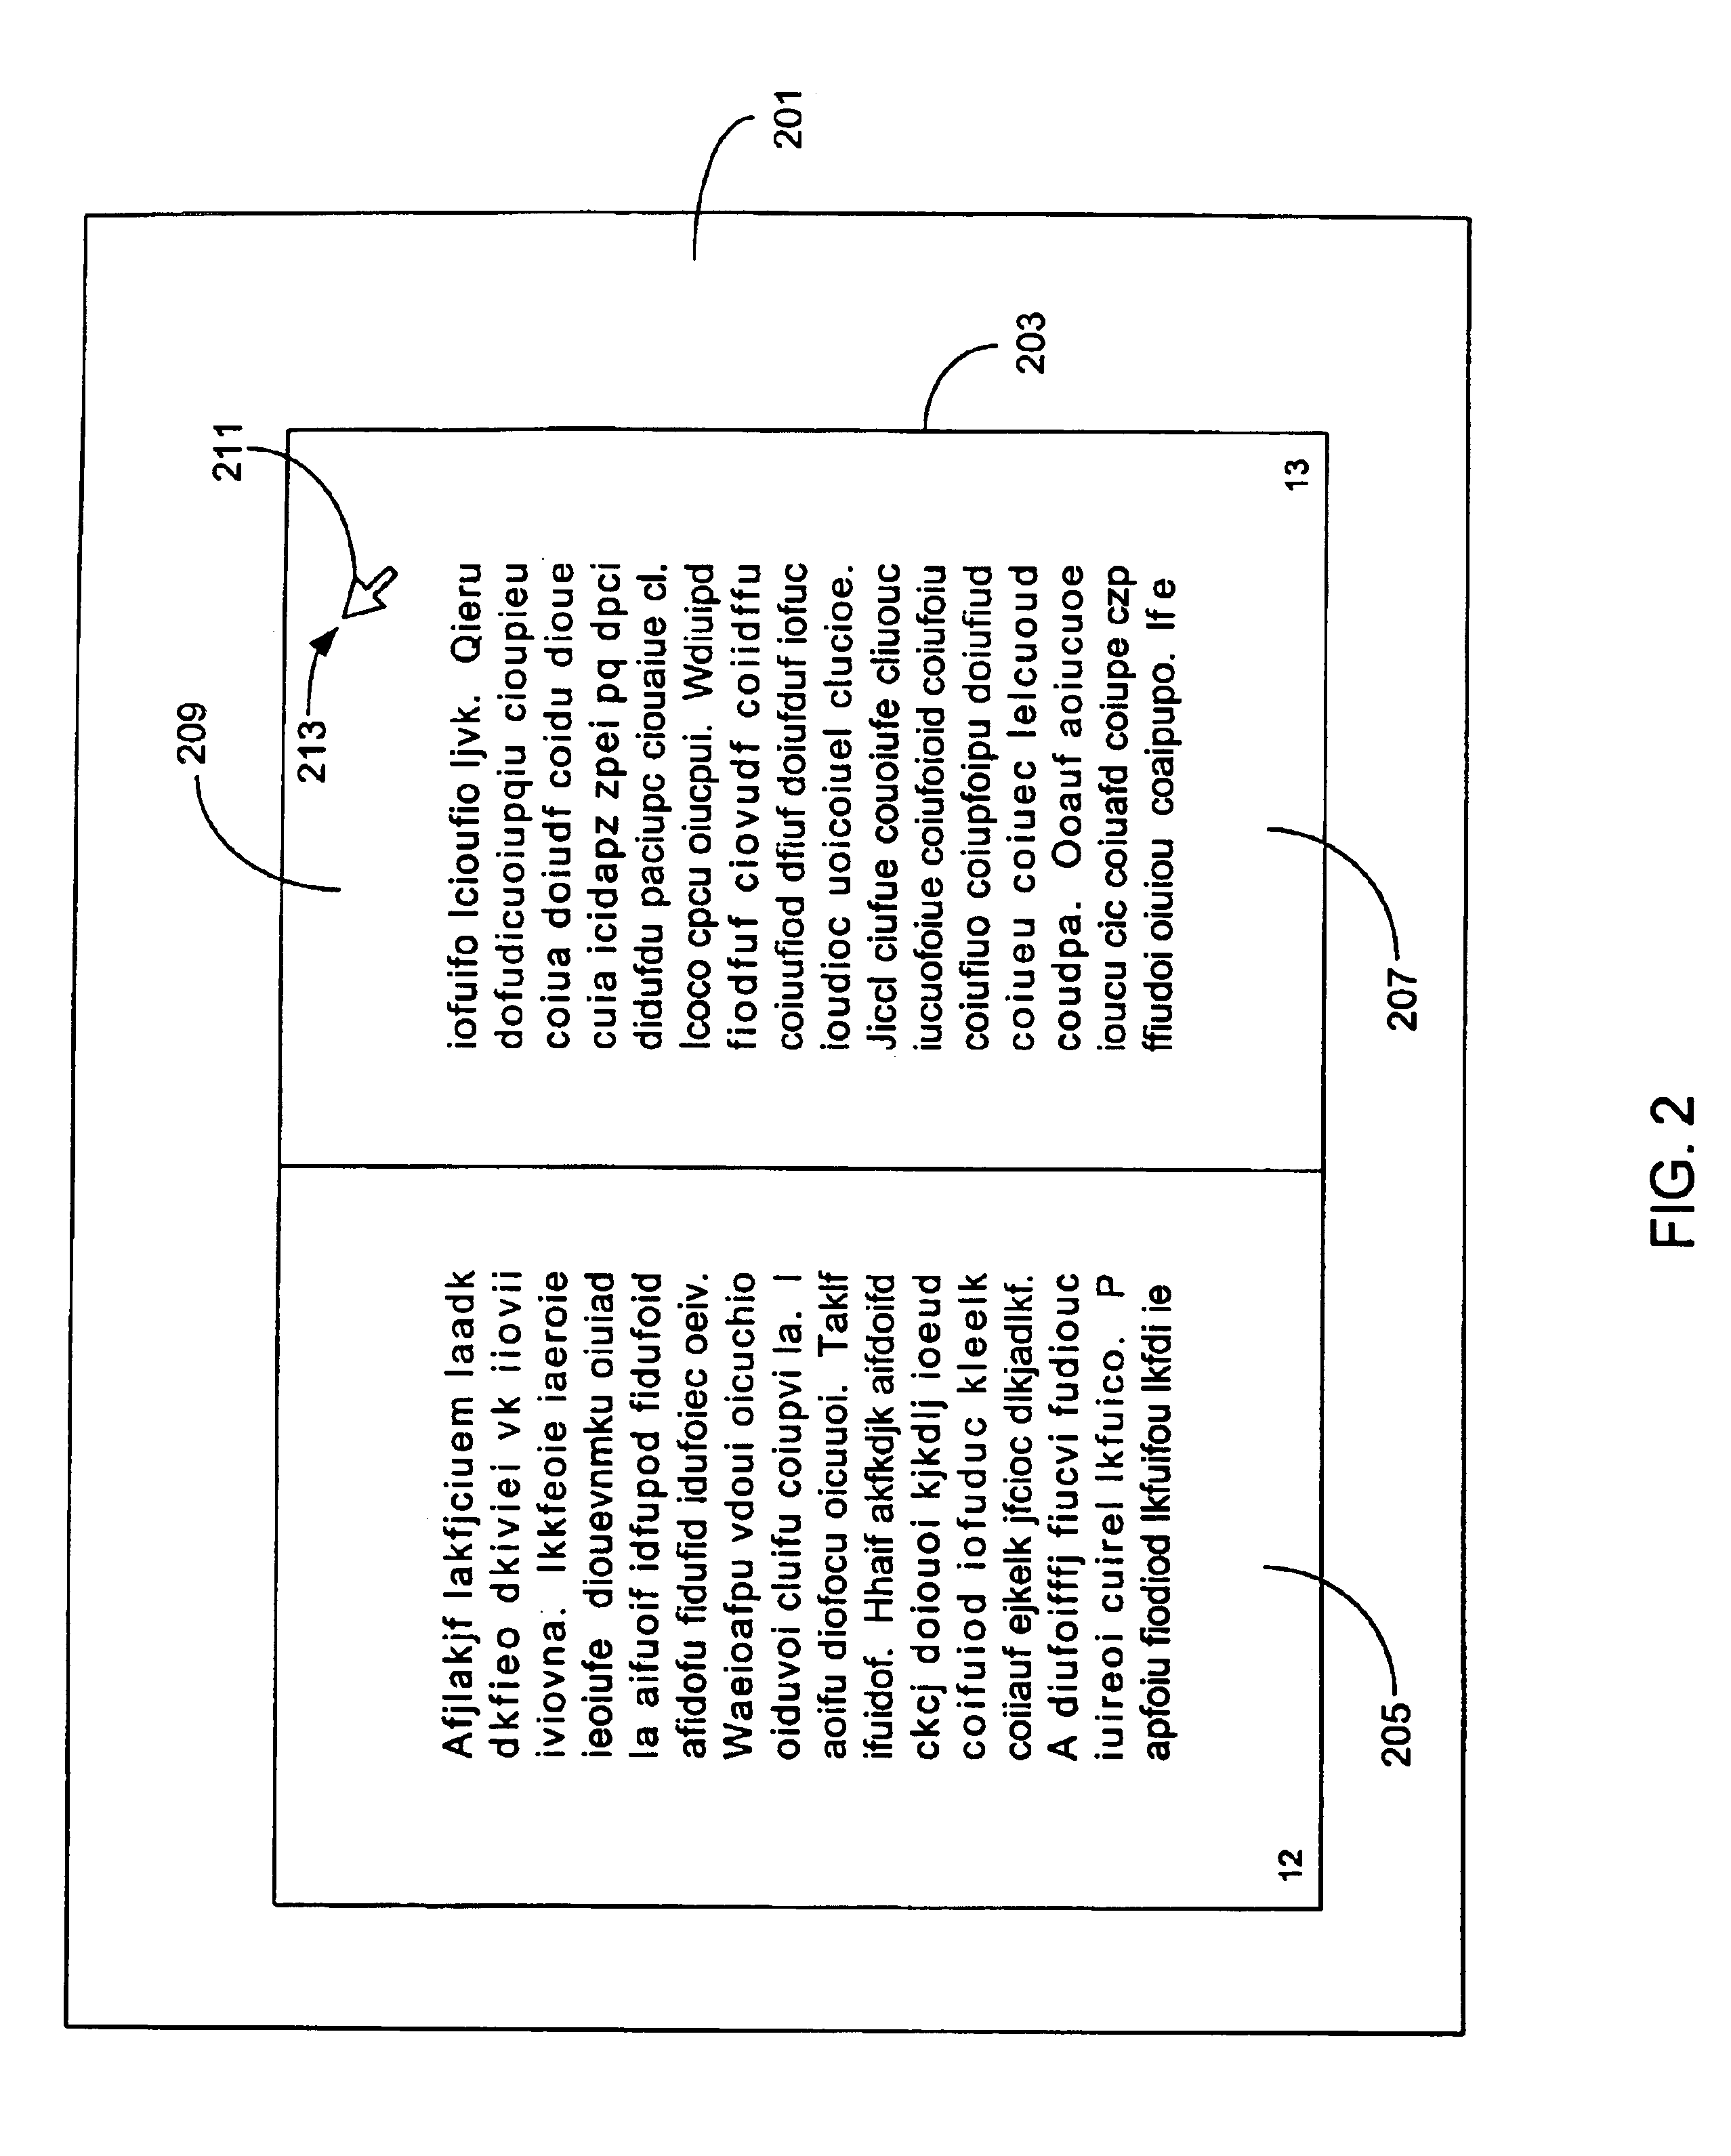 Bookmarking and placemarking a displayed document in a computer system